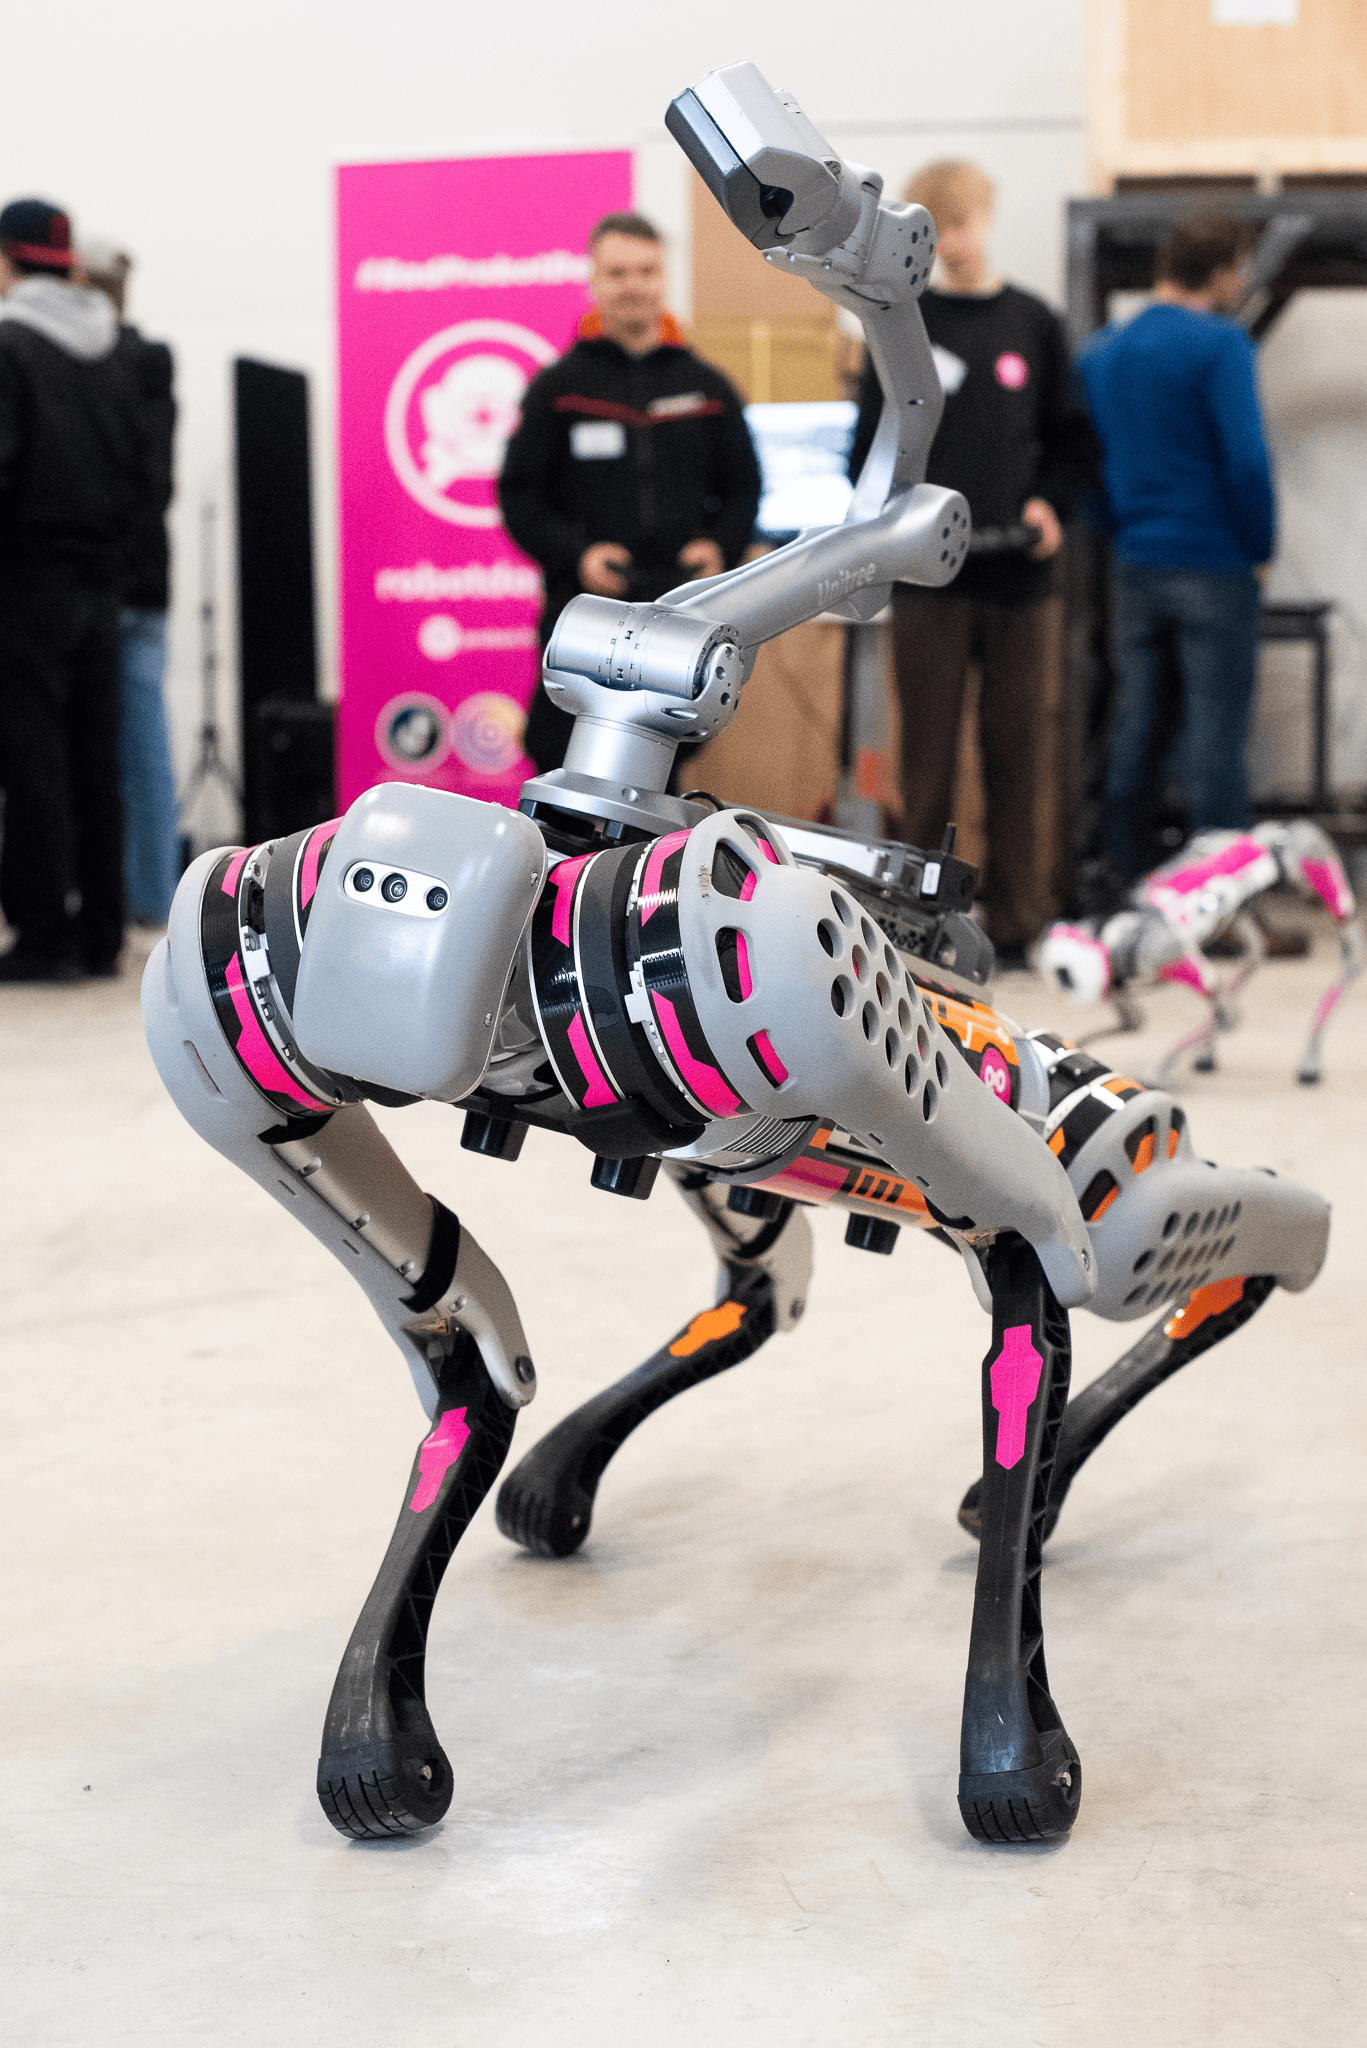 A large robot dog with an robot arm looks directly at the camera. A small robot dog in the background.